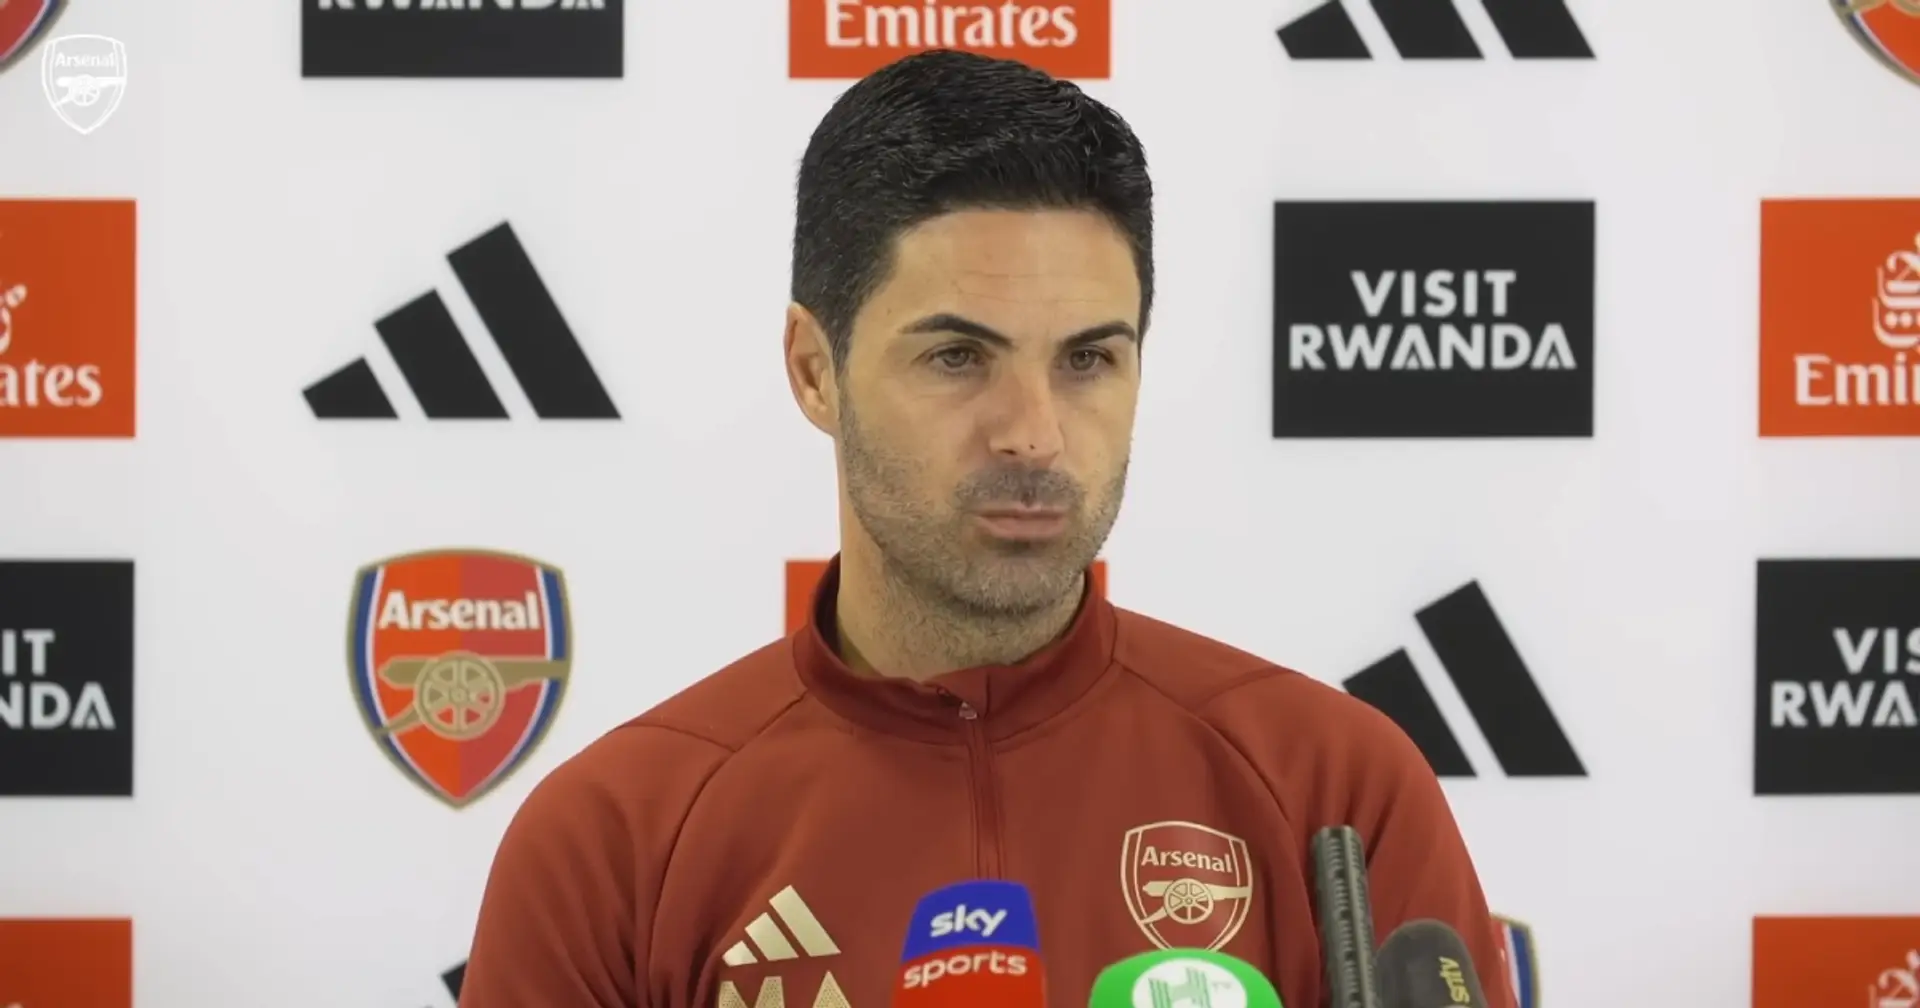 'I'm responsible for that': Mikel Arteta refuses to hide after West Ham defeat